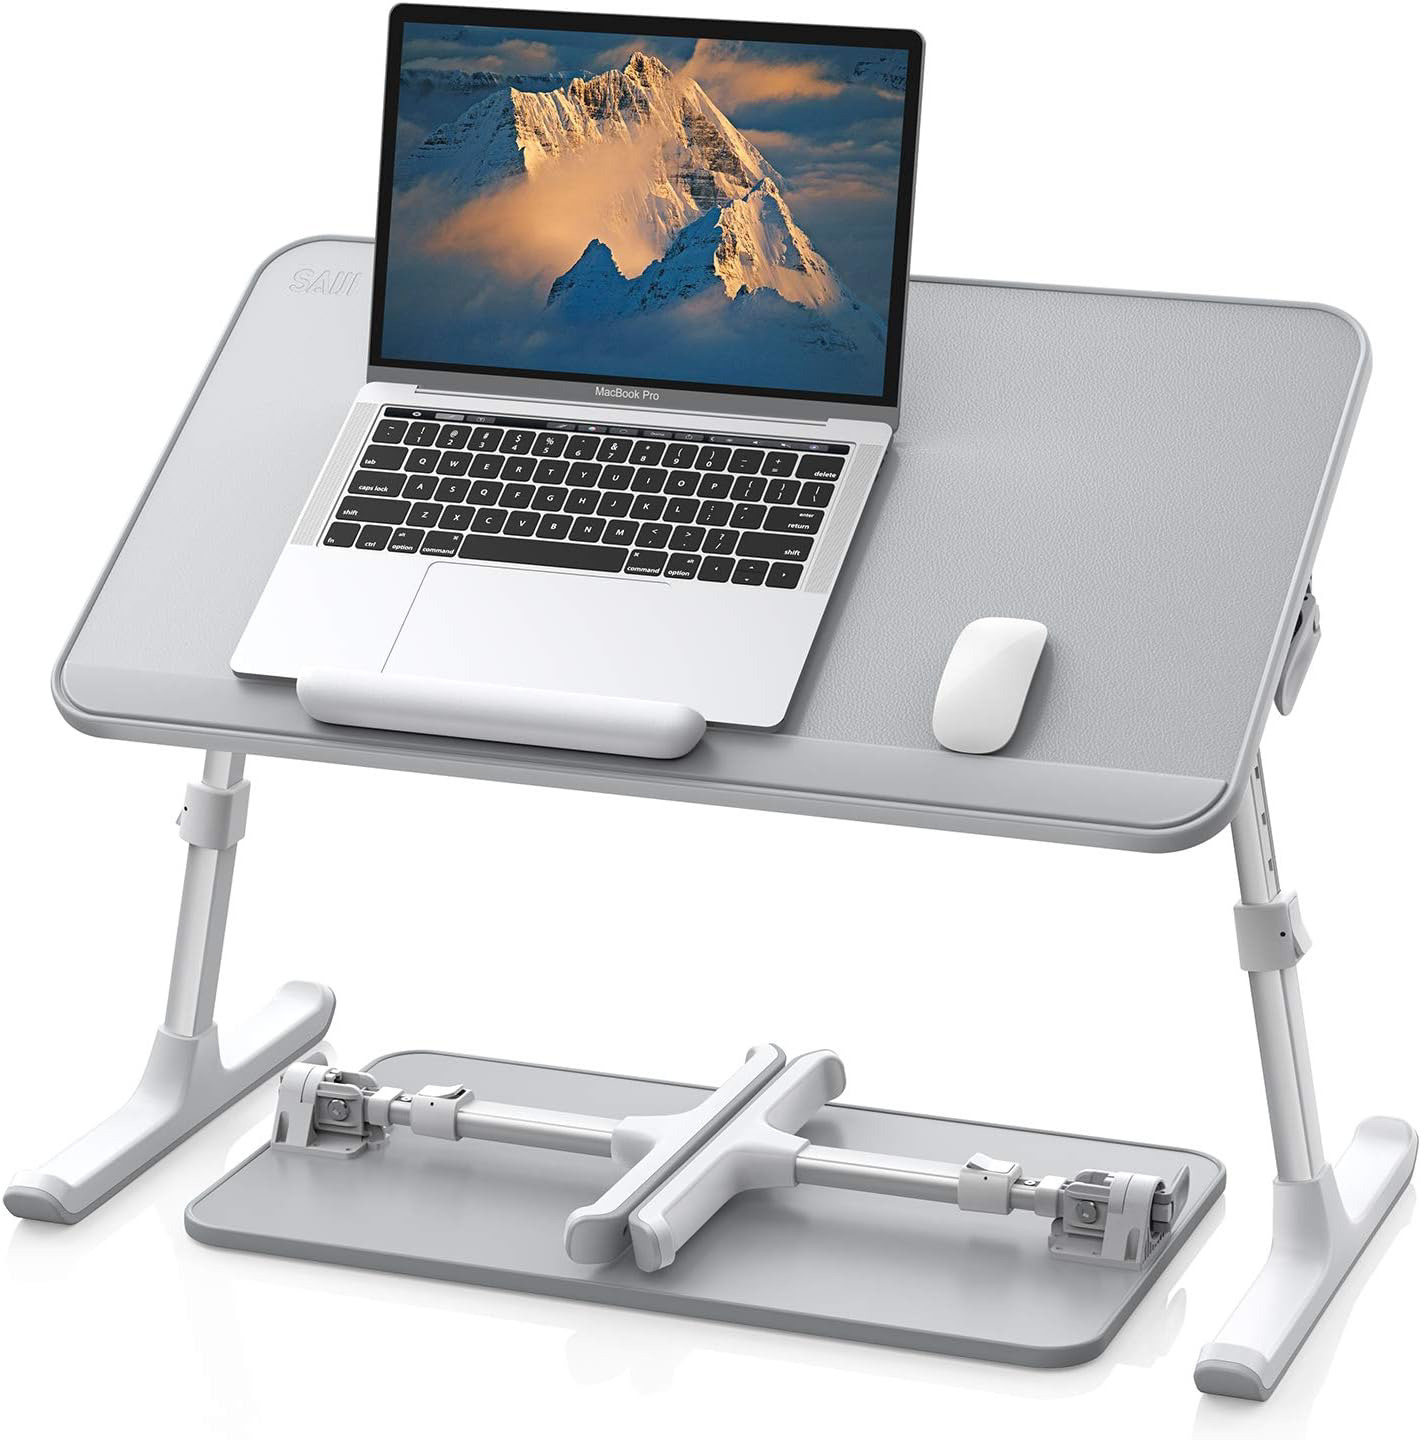 SAIJI Leather Laptop Bed Tray Table, Adjustable Laptop Stand with Removable Stop